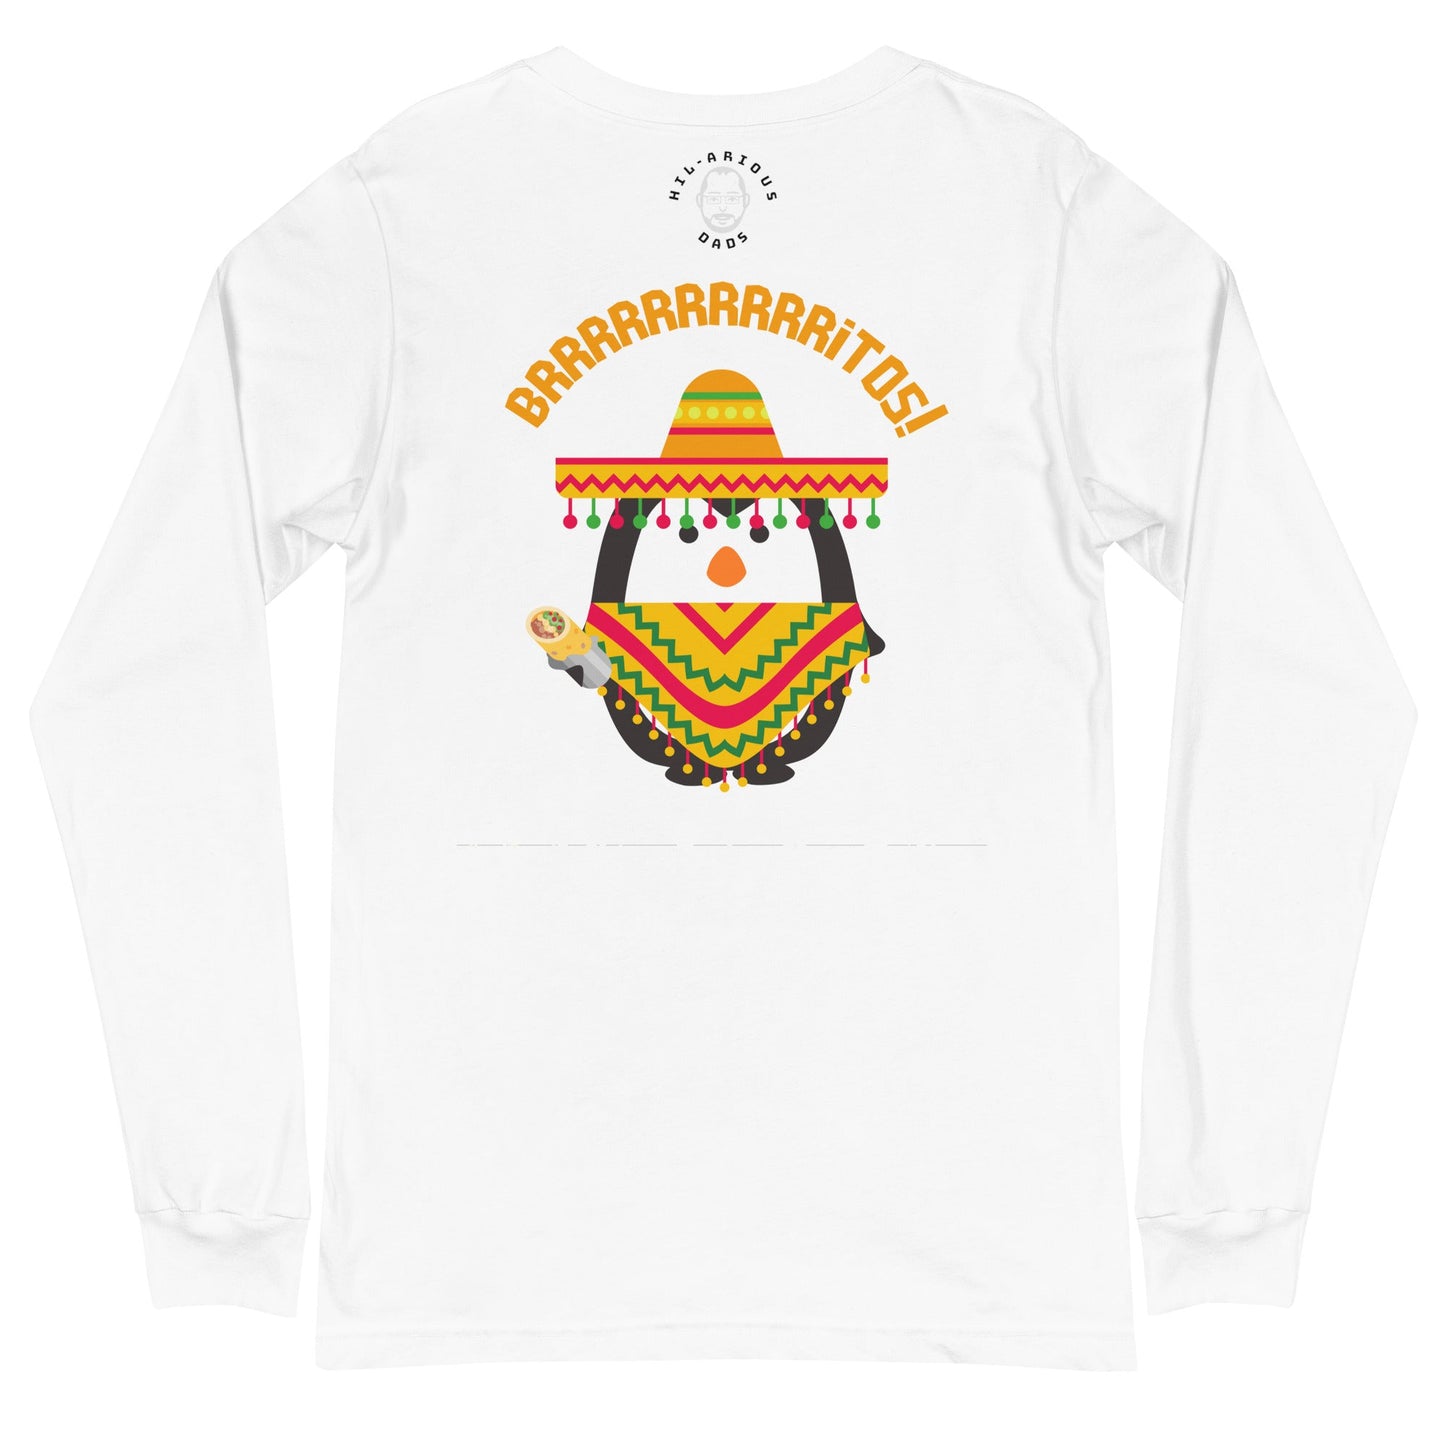 What do penguins like to eat during Cinco De Mayo?-Long Sleeve Tee - Hil-arious Dads